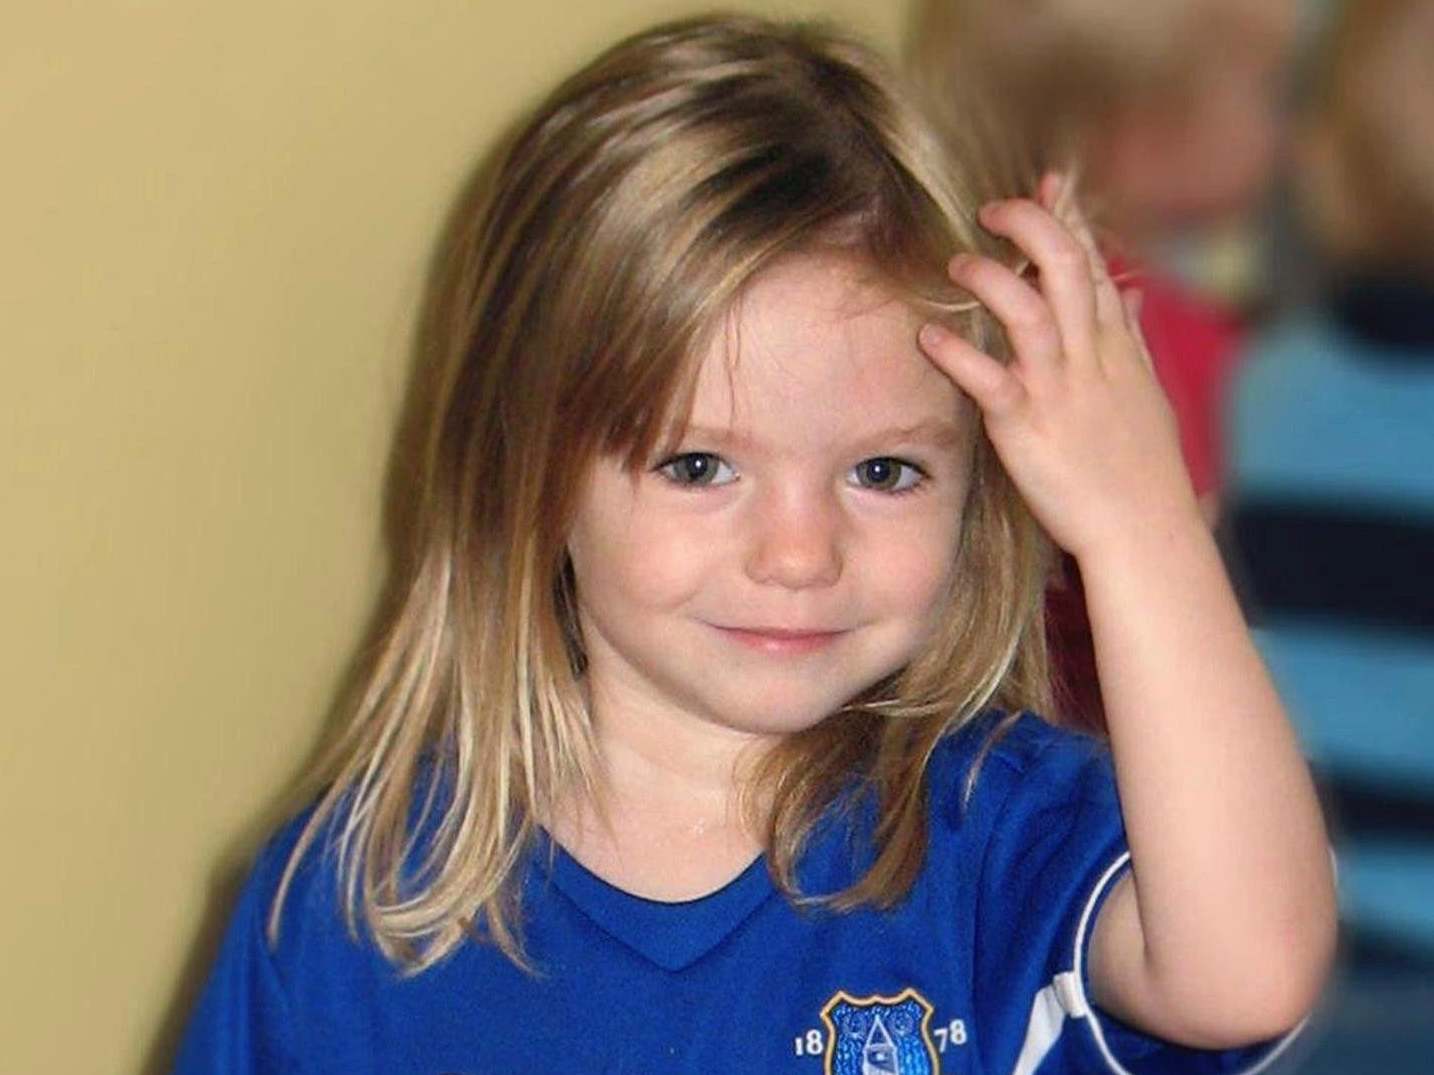 Madeleine McCann disappearance: Police 'find hidden cellar' while searching suspect's former allotment